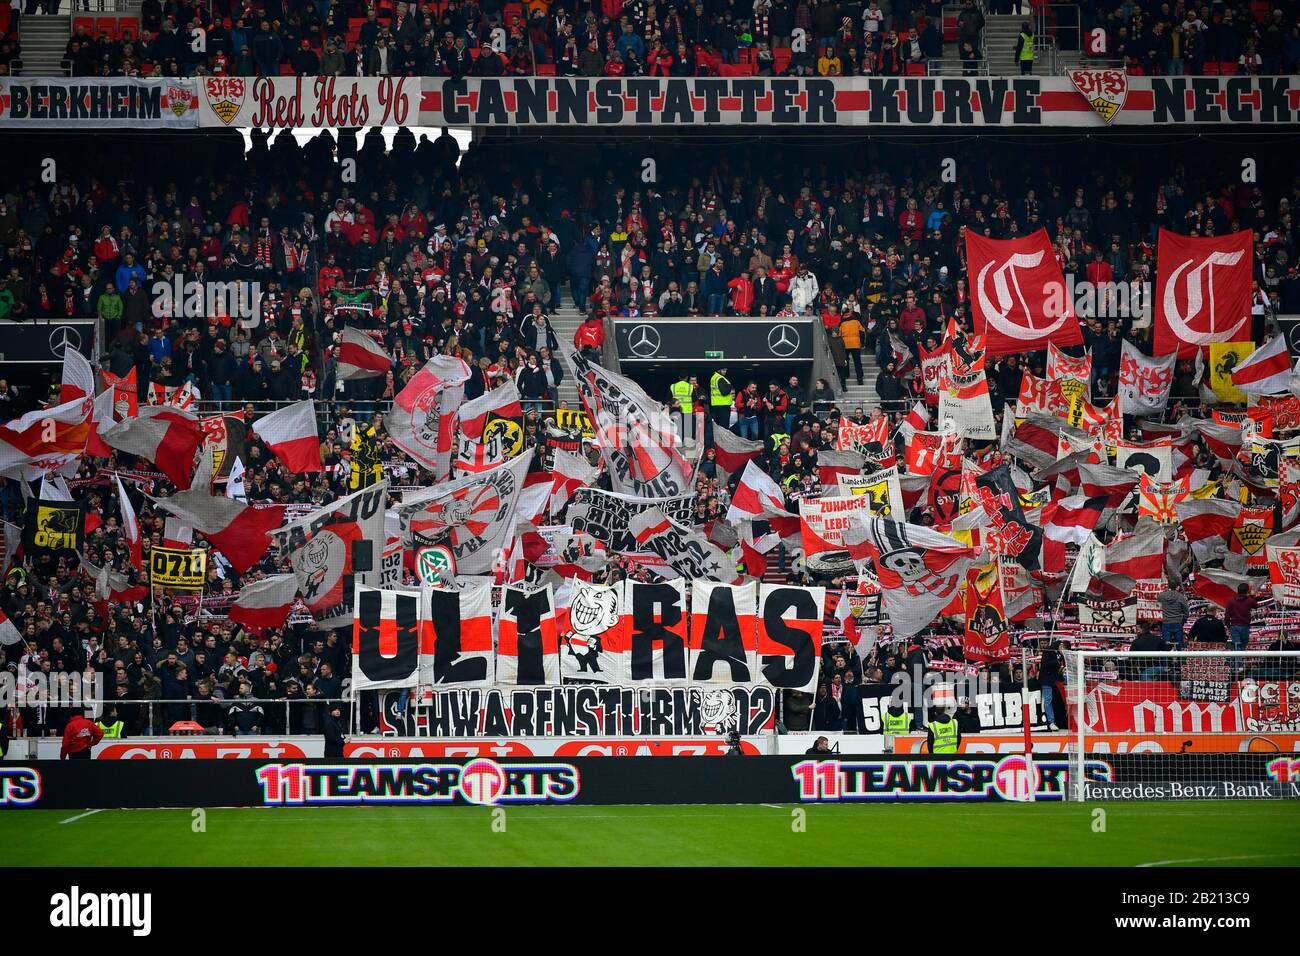 Cannstatter with poster ULTRAS, Mercedes-Benz Arena, Stuttgart, Germany Stock Photo - Alamy